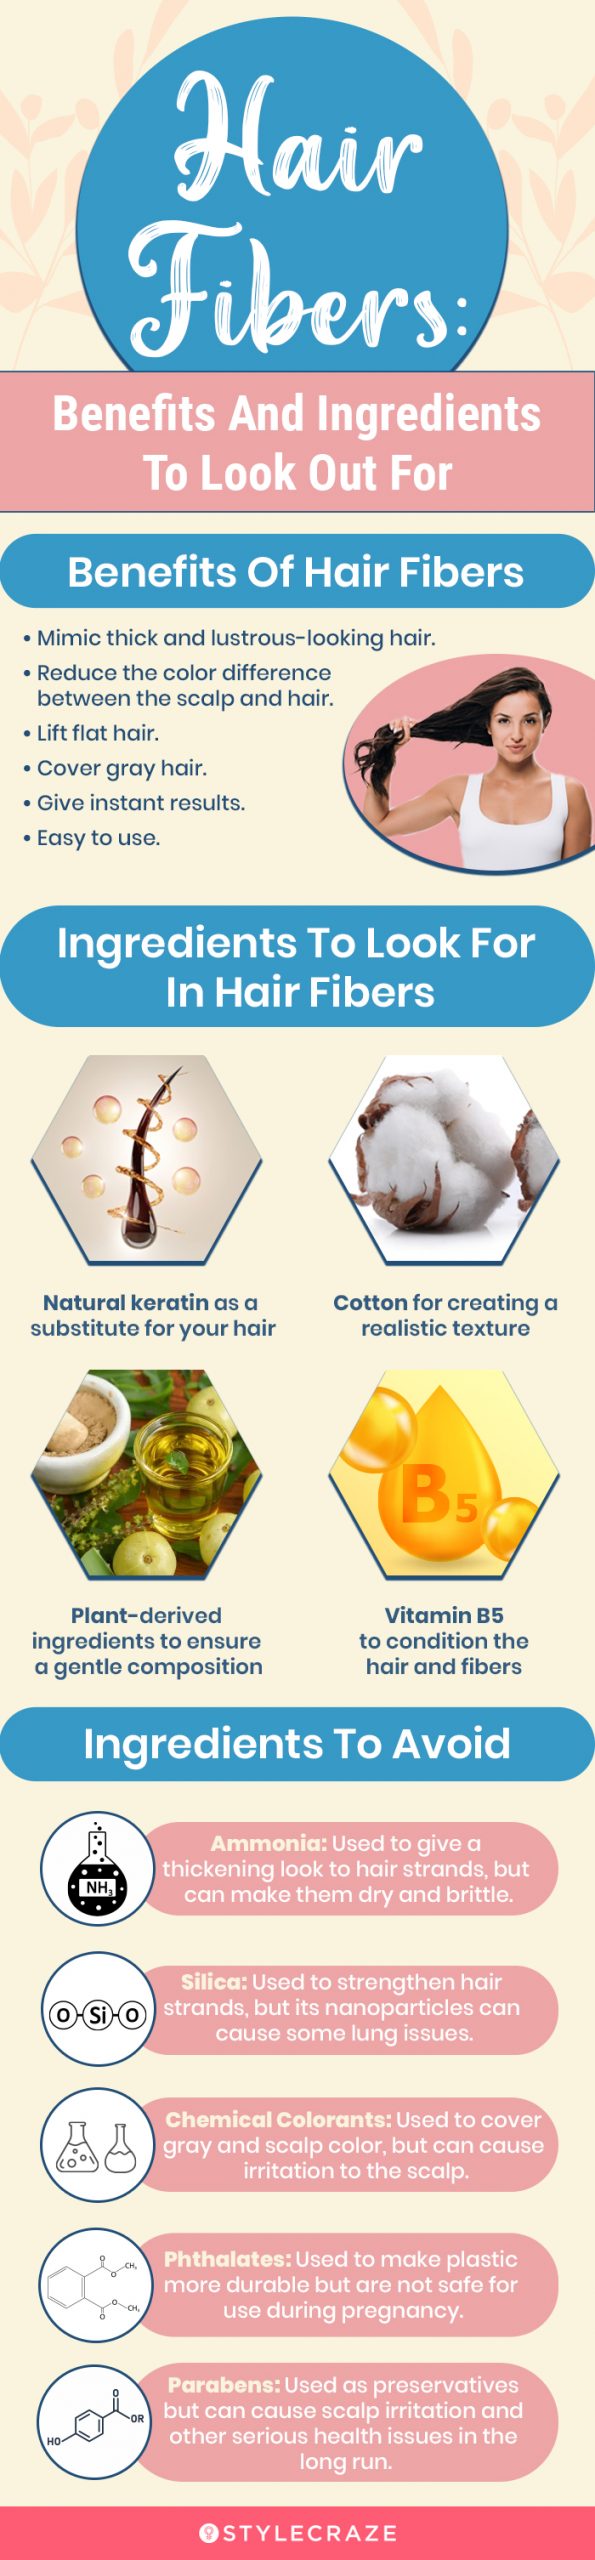 Hair Fibers: Benefits And Ingredients To Look Out For